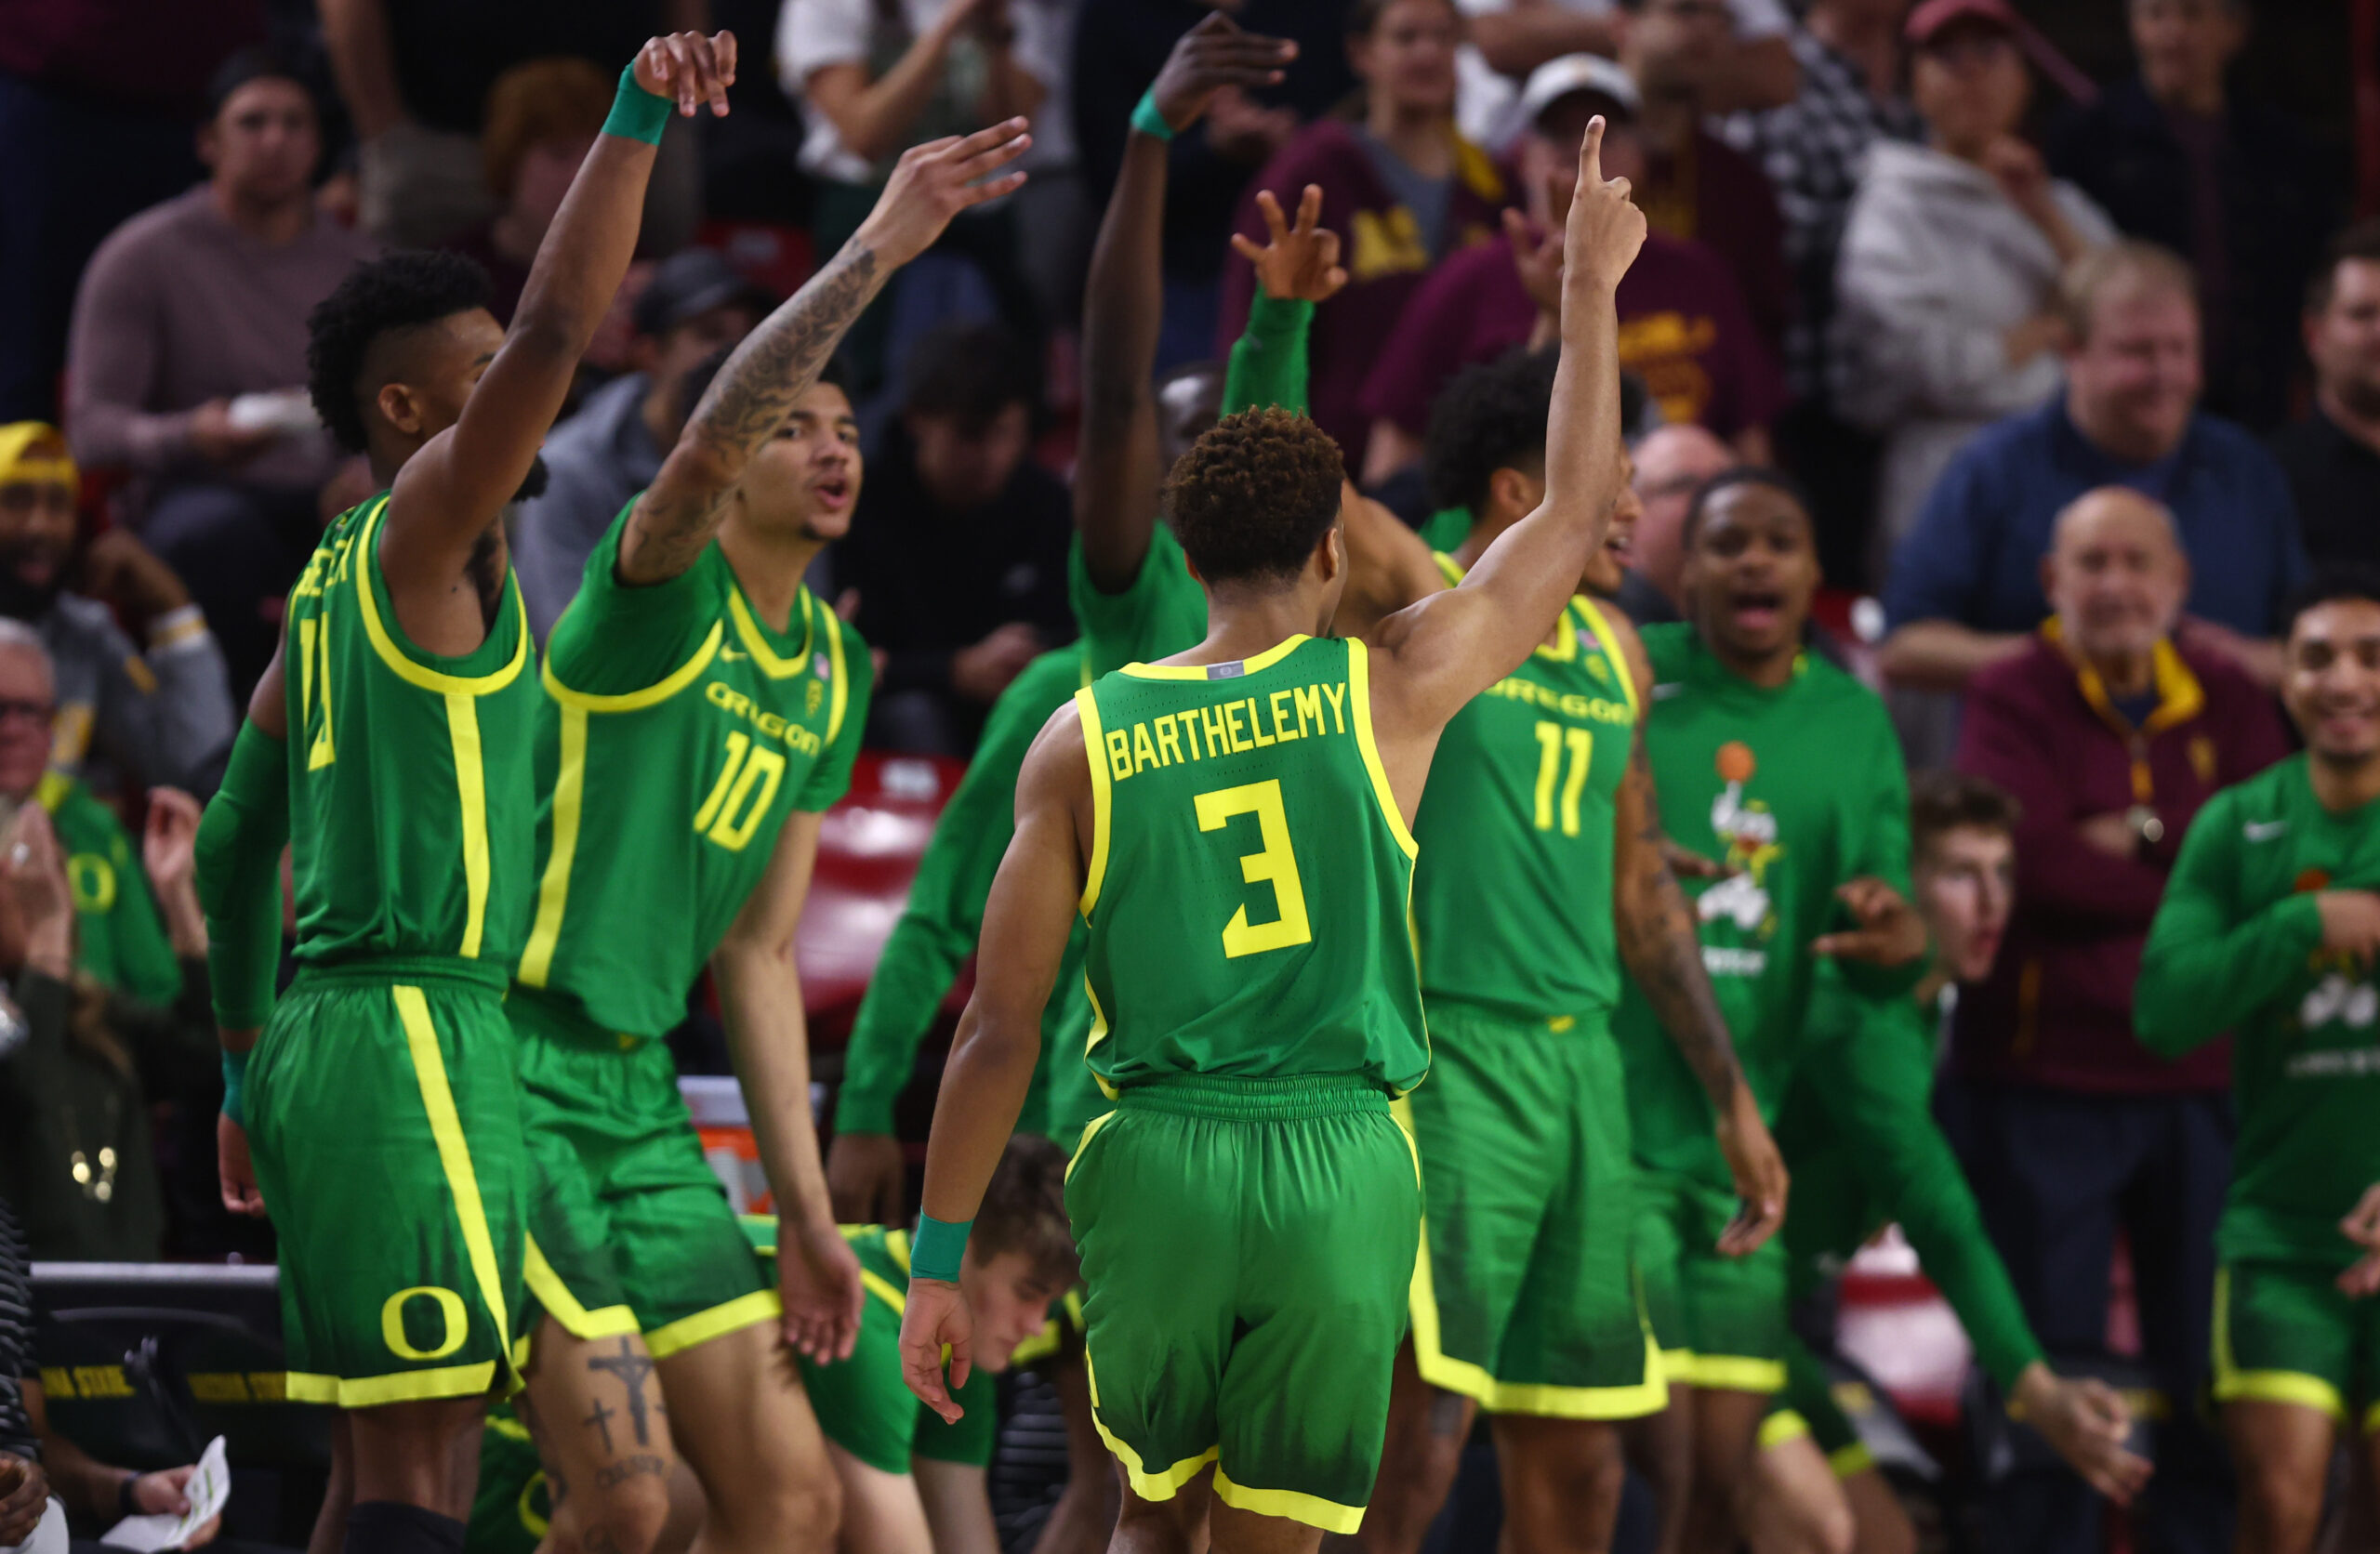 Wisconsin vs. Oregon, live stream, TV channel, time, odds, how to watch the NIT